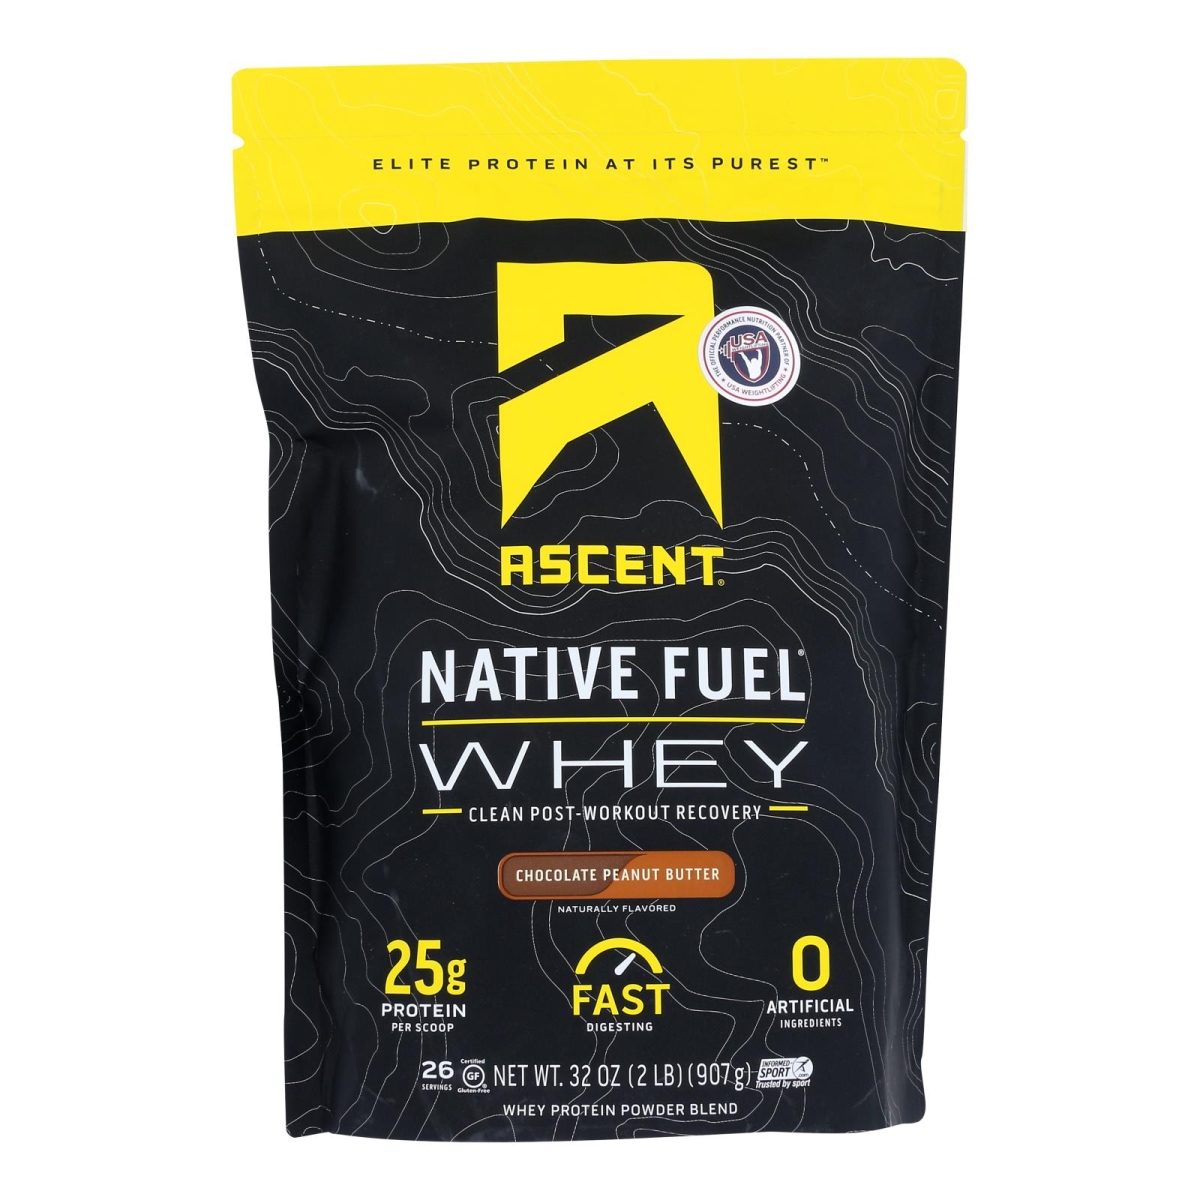 Ascent Native Fuel Whey Protein Powder - Post Workout Whey Protein Isolate, Zero Artificial Ingredients, Soy & Gluten Free, 5.7g BCAA, 2.7g Leucine, Essential Amino Acids, Chocolate Peanut Butter 2 lb (B07M6LWRPV) - 815863020436